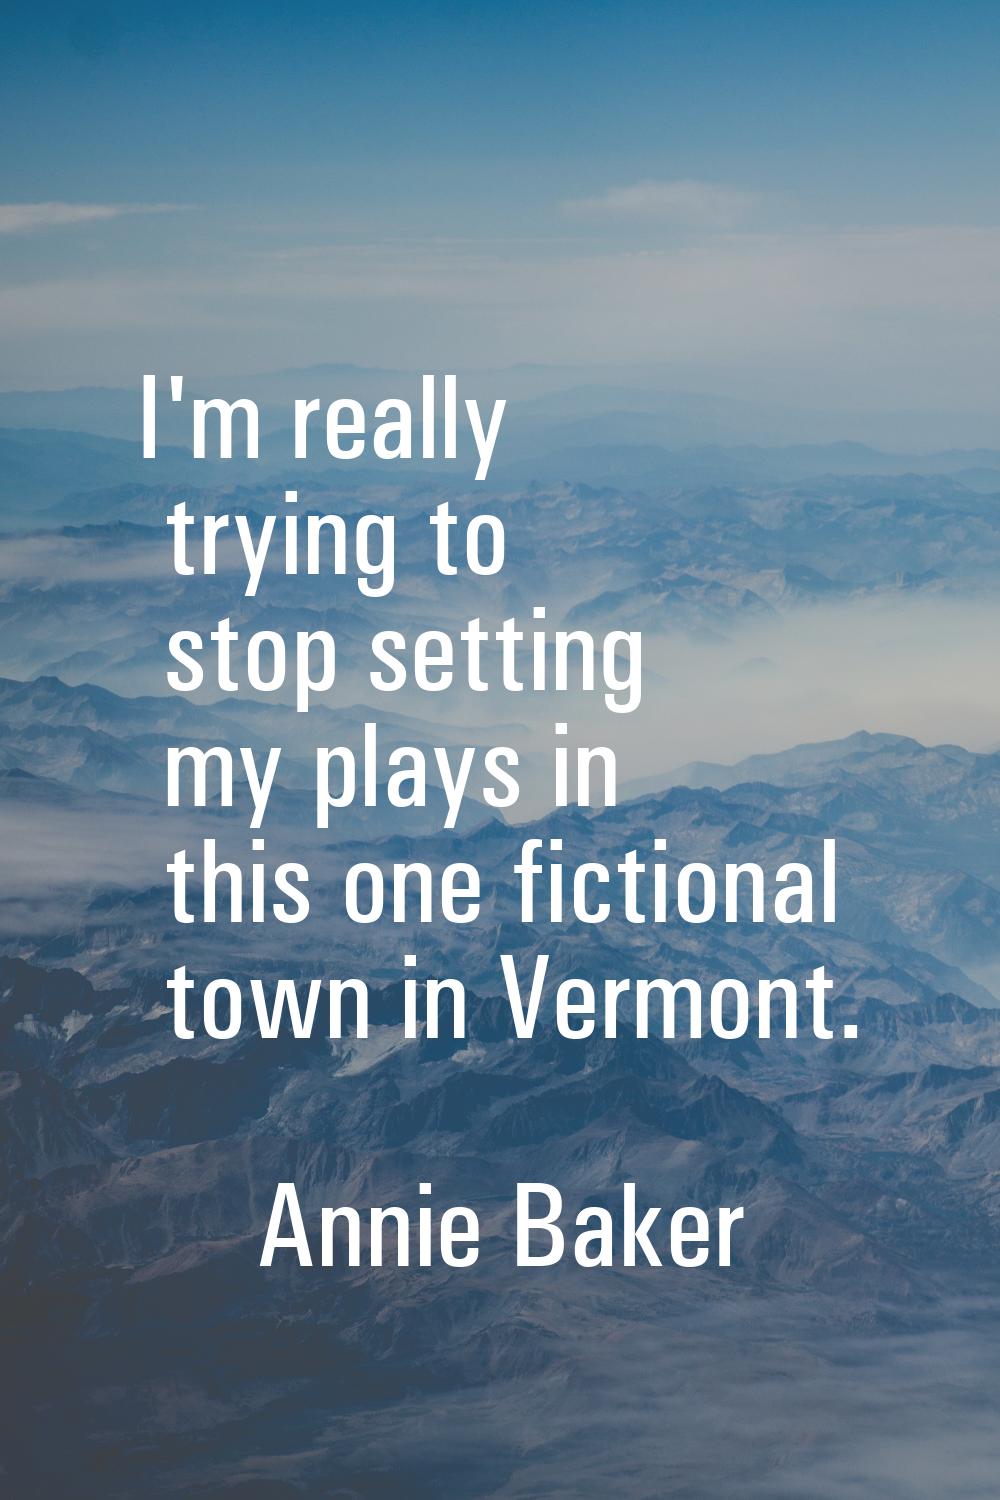 I'm really trying to stop setting my plays in this one fictional town in Vermont.